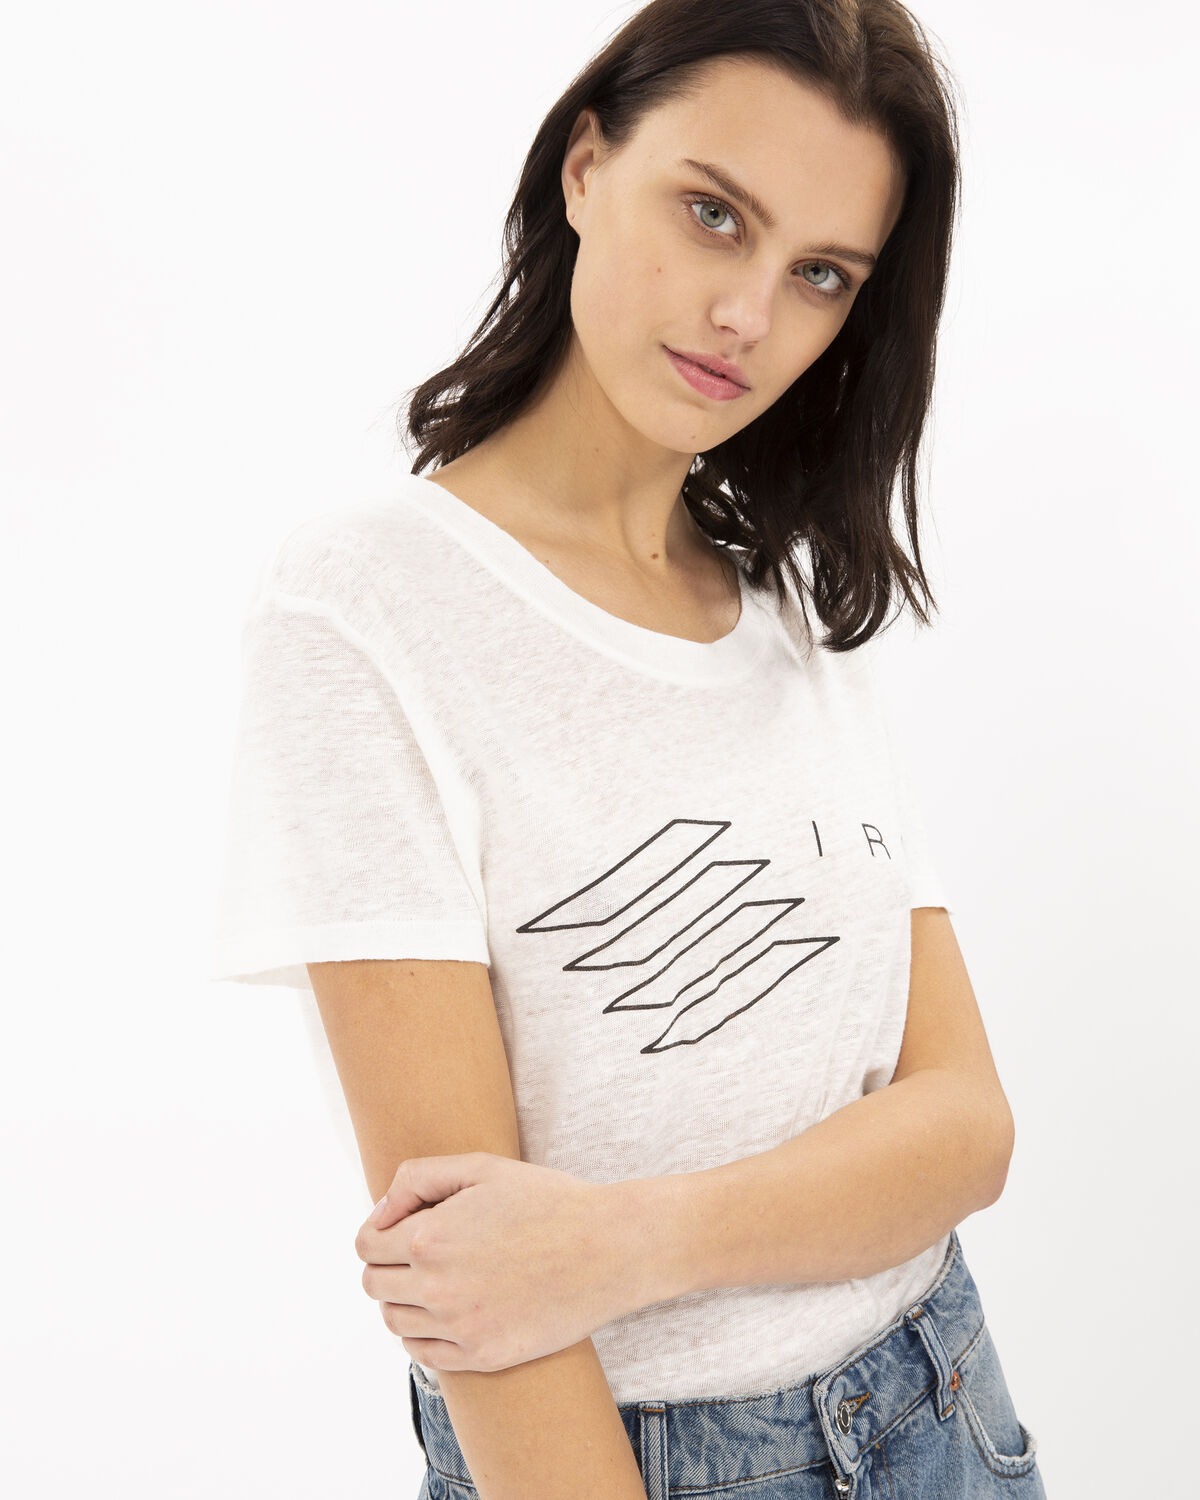 Photo of IRO Paris Lucie T-Shirt White - This Season, Iro Revisits Its Timeless Linen T-shirt And Offers A Resolutely Modern Silkscreened Version. With Its Graphic Logo, This Top Will Perfectly Match Jeans And A Pair Of Dad Shoes For A Casual Silhouette. Spring Summer 19